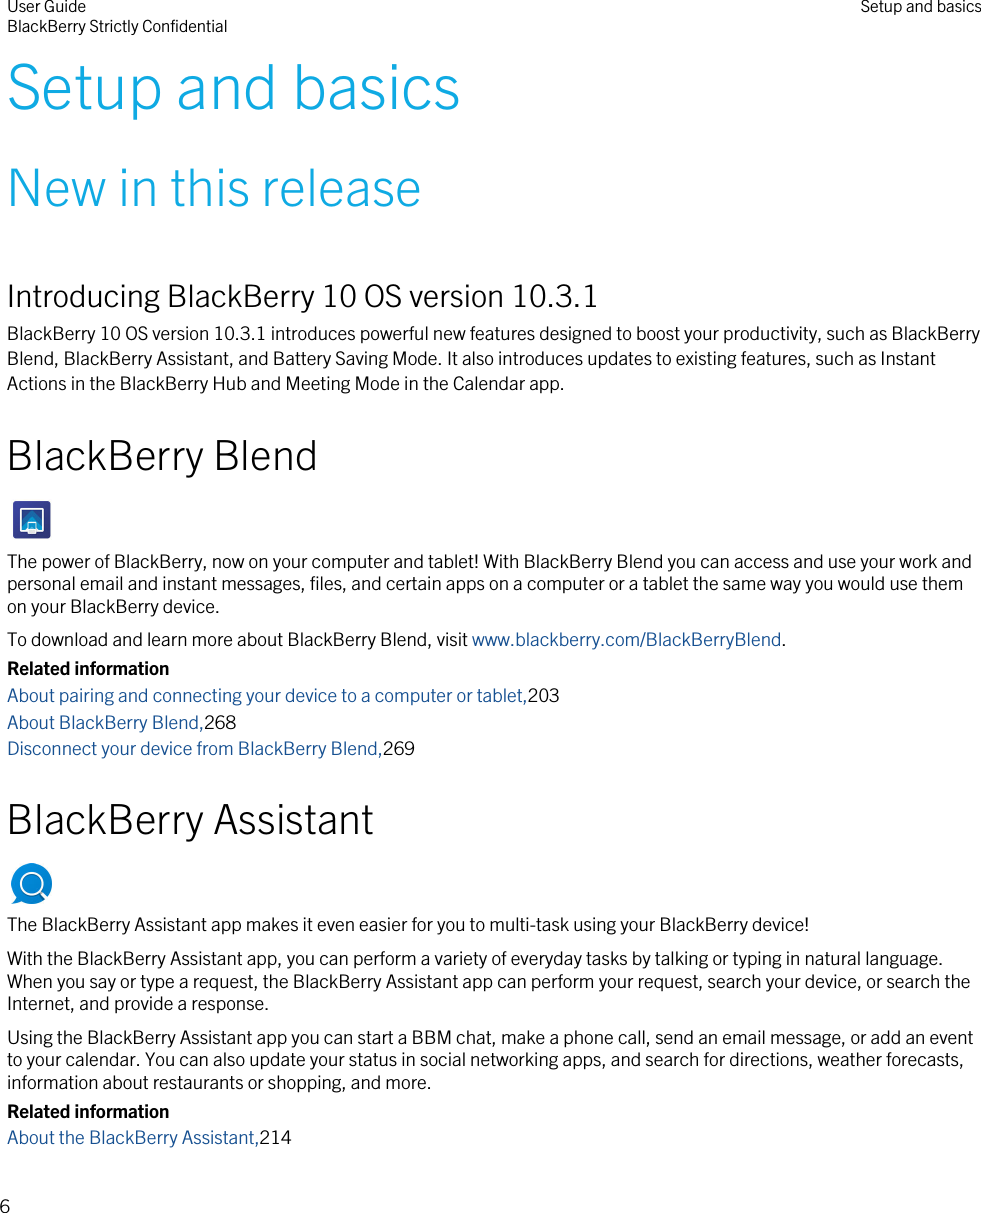 Setup and basicsNew in this releaseIntroducing BlackBerry 10 OS version 10.3.1BlackBerry 10 OS version 10.3.1 introduces powerful new features designed to boost your productivity, such as BlackBerry Blend, BlackBerry Assistant, and Battery Saving Mode. It also introduces updates to existing features, such as Instant Actions in the BlackBerry Hub and Meeting Mode in the Calendar app.BlackBerry BlendThe power of BlackBerry, now on your computer and tablet! With BlackBerry Blend you can access and use your work and personal email and instant messages, files, and certain apps on a computer or a tablet the same way you would use them on your BlackBerry device.To download and learn more about BlackBerry Blend, visit www.blackberry.com/BlackBerryBlend.Related informationAbout pairing and connecting your device to a computer or tablet,203About BlackBerry Blend,268Disconnect your device from BlackBerry Blend,269BlackBerry AssistantThe BlackBerry Assistant app makes it even easier for you to multi-task using your BlackBerry device!With the BlackBerry Assistant app, you can perform a variety of everyday tasks by talking or typing in natural language. When you say or type a request, the BlackBerry Assistant app can perform your request, search your device, or search the Internet, and provide a response.Using the BlackBerry Assistant app you can start a BBM chat, make a phone call, send an email message, or add an event to your calendar. You can also update your status in social networking apps, and search for directions, weather forecasts, information about restaurants or shopping, and more.Related informationAbout the BlackBerry Assistant,214User GuideBlackBerry Strictly Confidential Setup and basics6